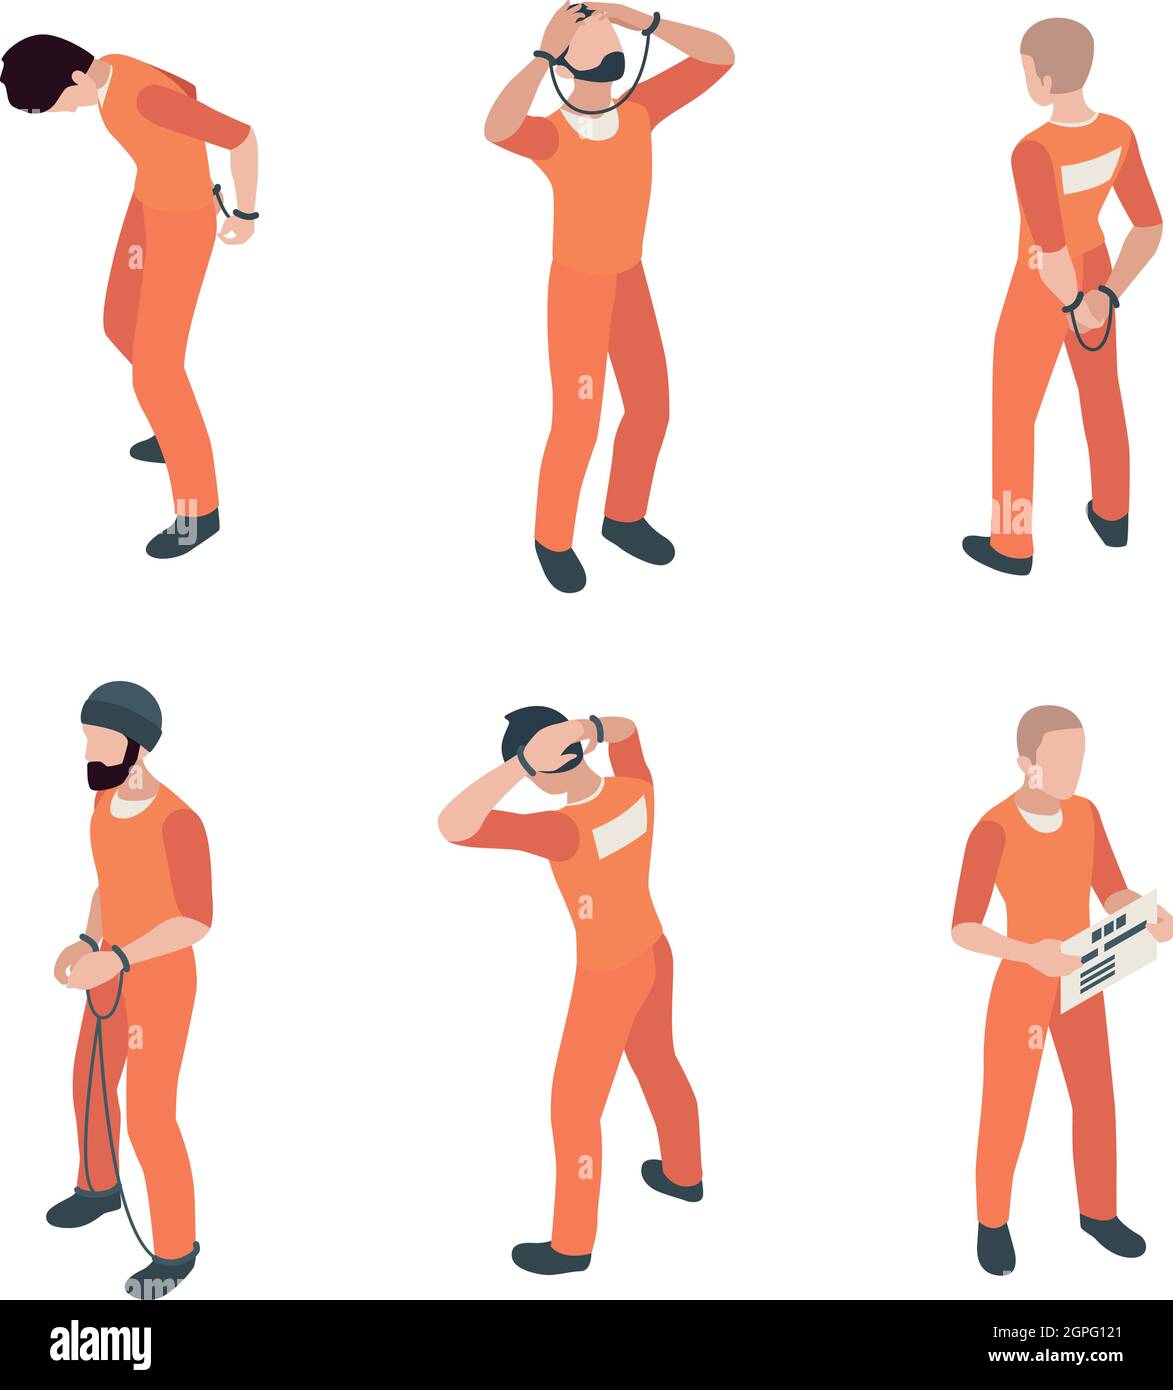 Prisoner characters. Jail guy bandit thief in specific costumes vector person in action poses Stock Vector